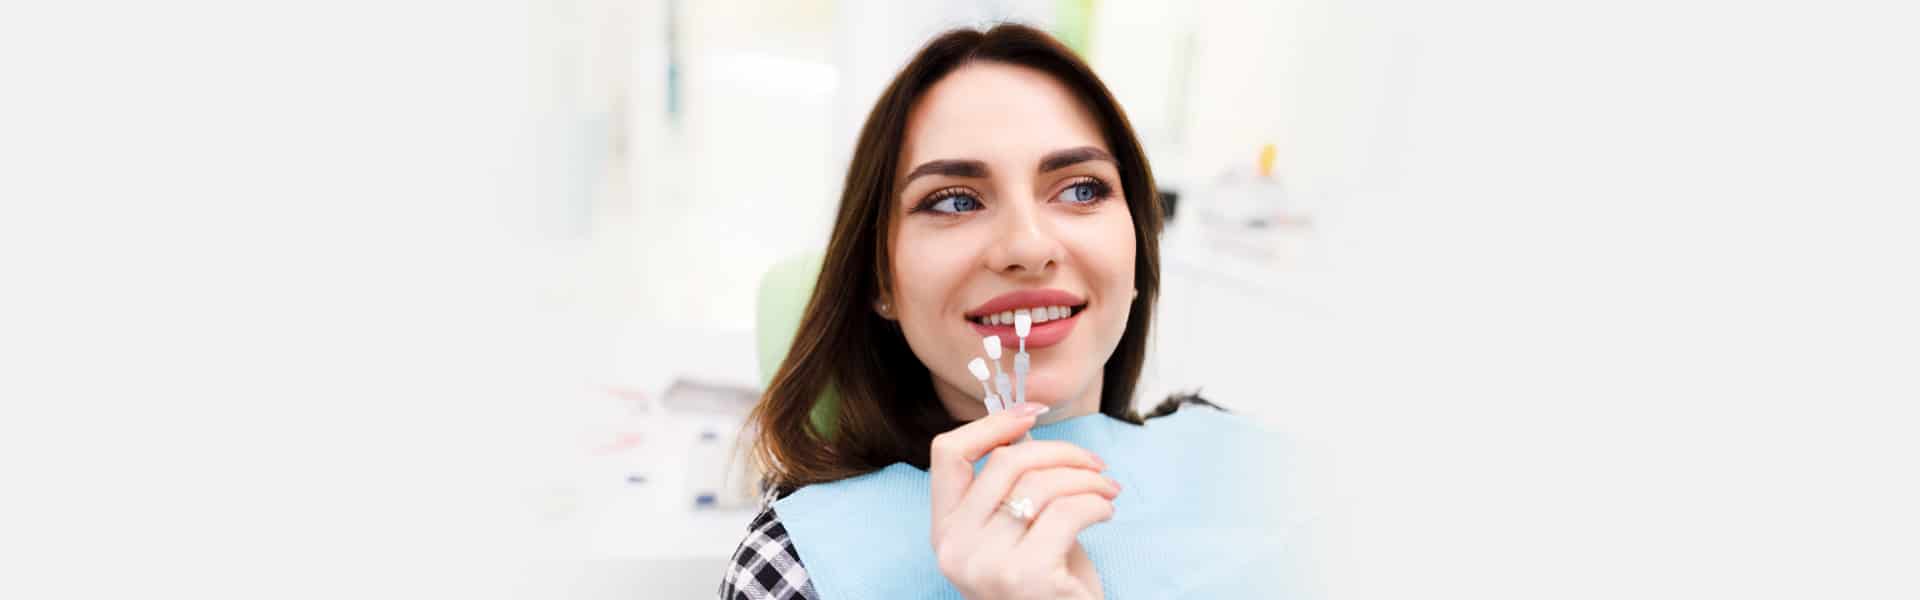 Types of Dental Veneers: How to Choose the Best for You